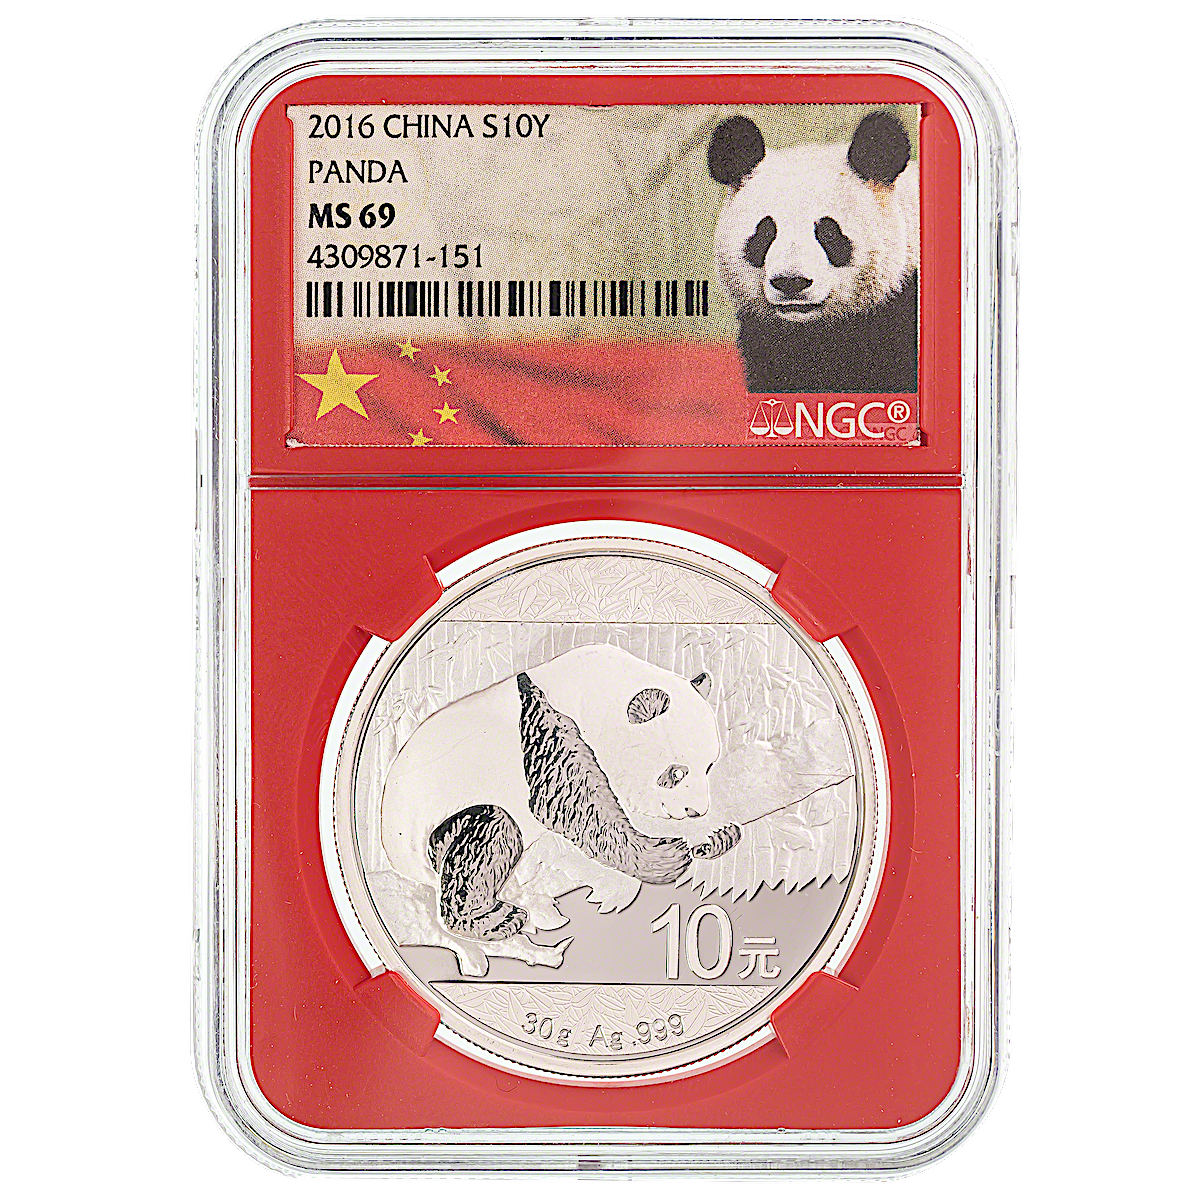 regio Cilia ontspannen Chinese Silver Panda 2016 - Graded MS 69 by NGC - 30 g